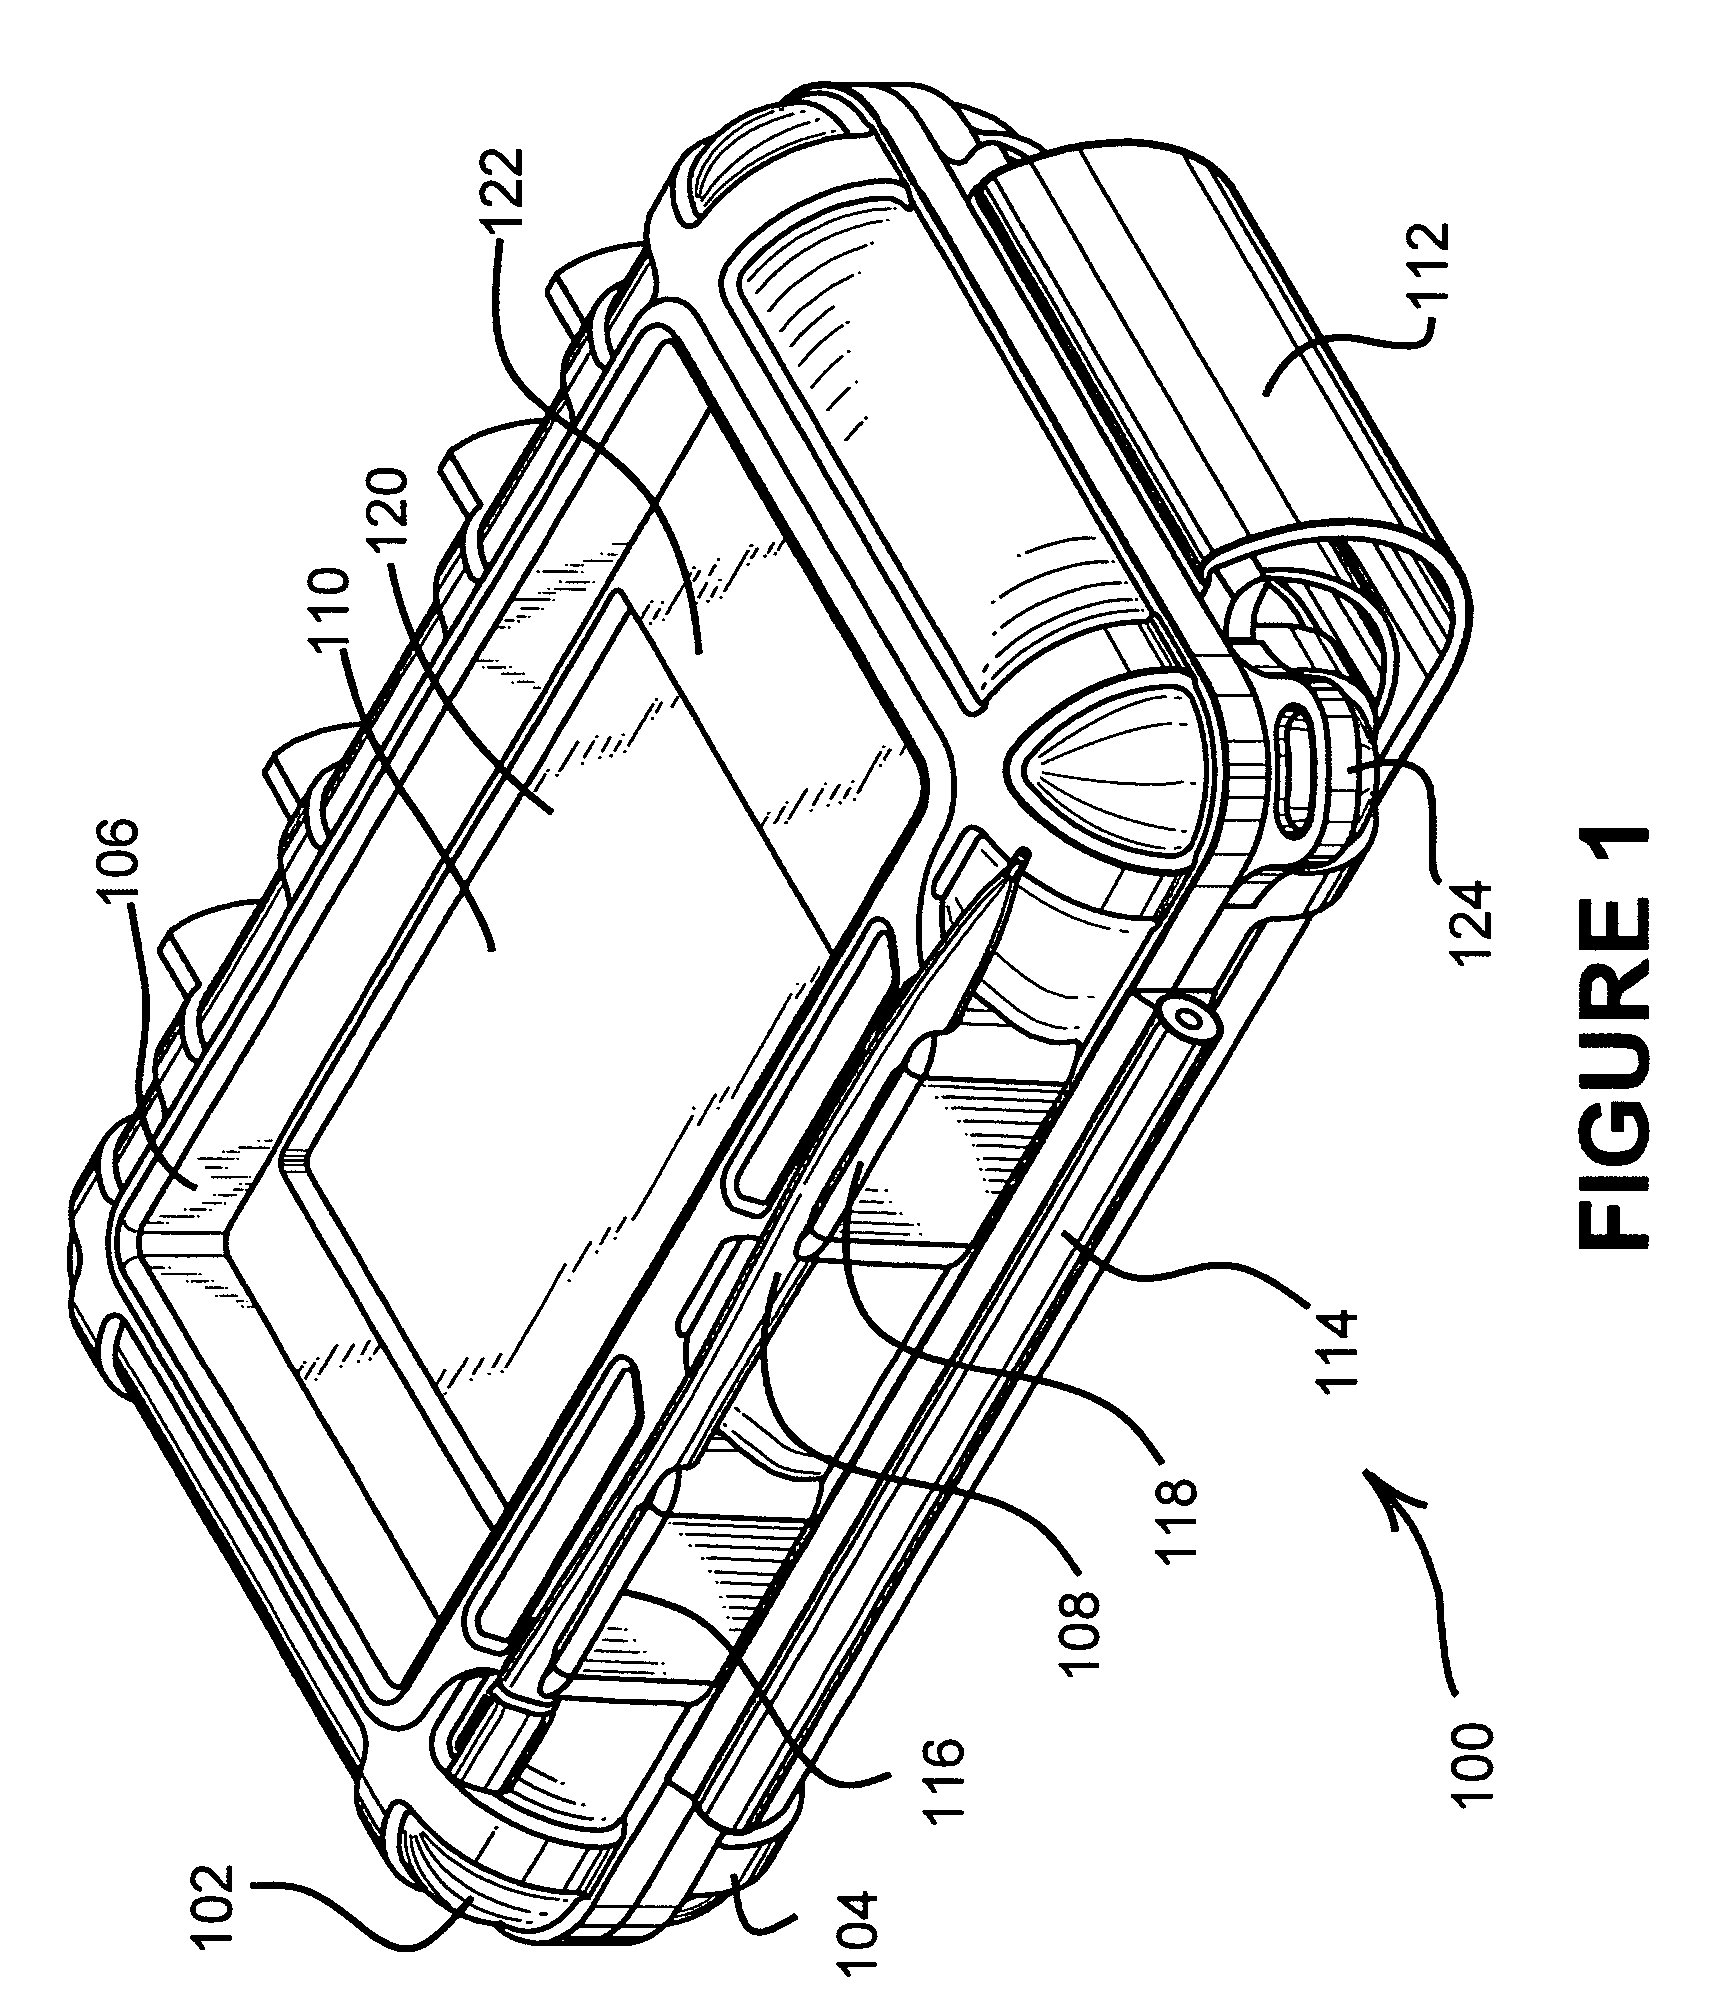 Protective enclosure for an interactive flat-panel controlled device